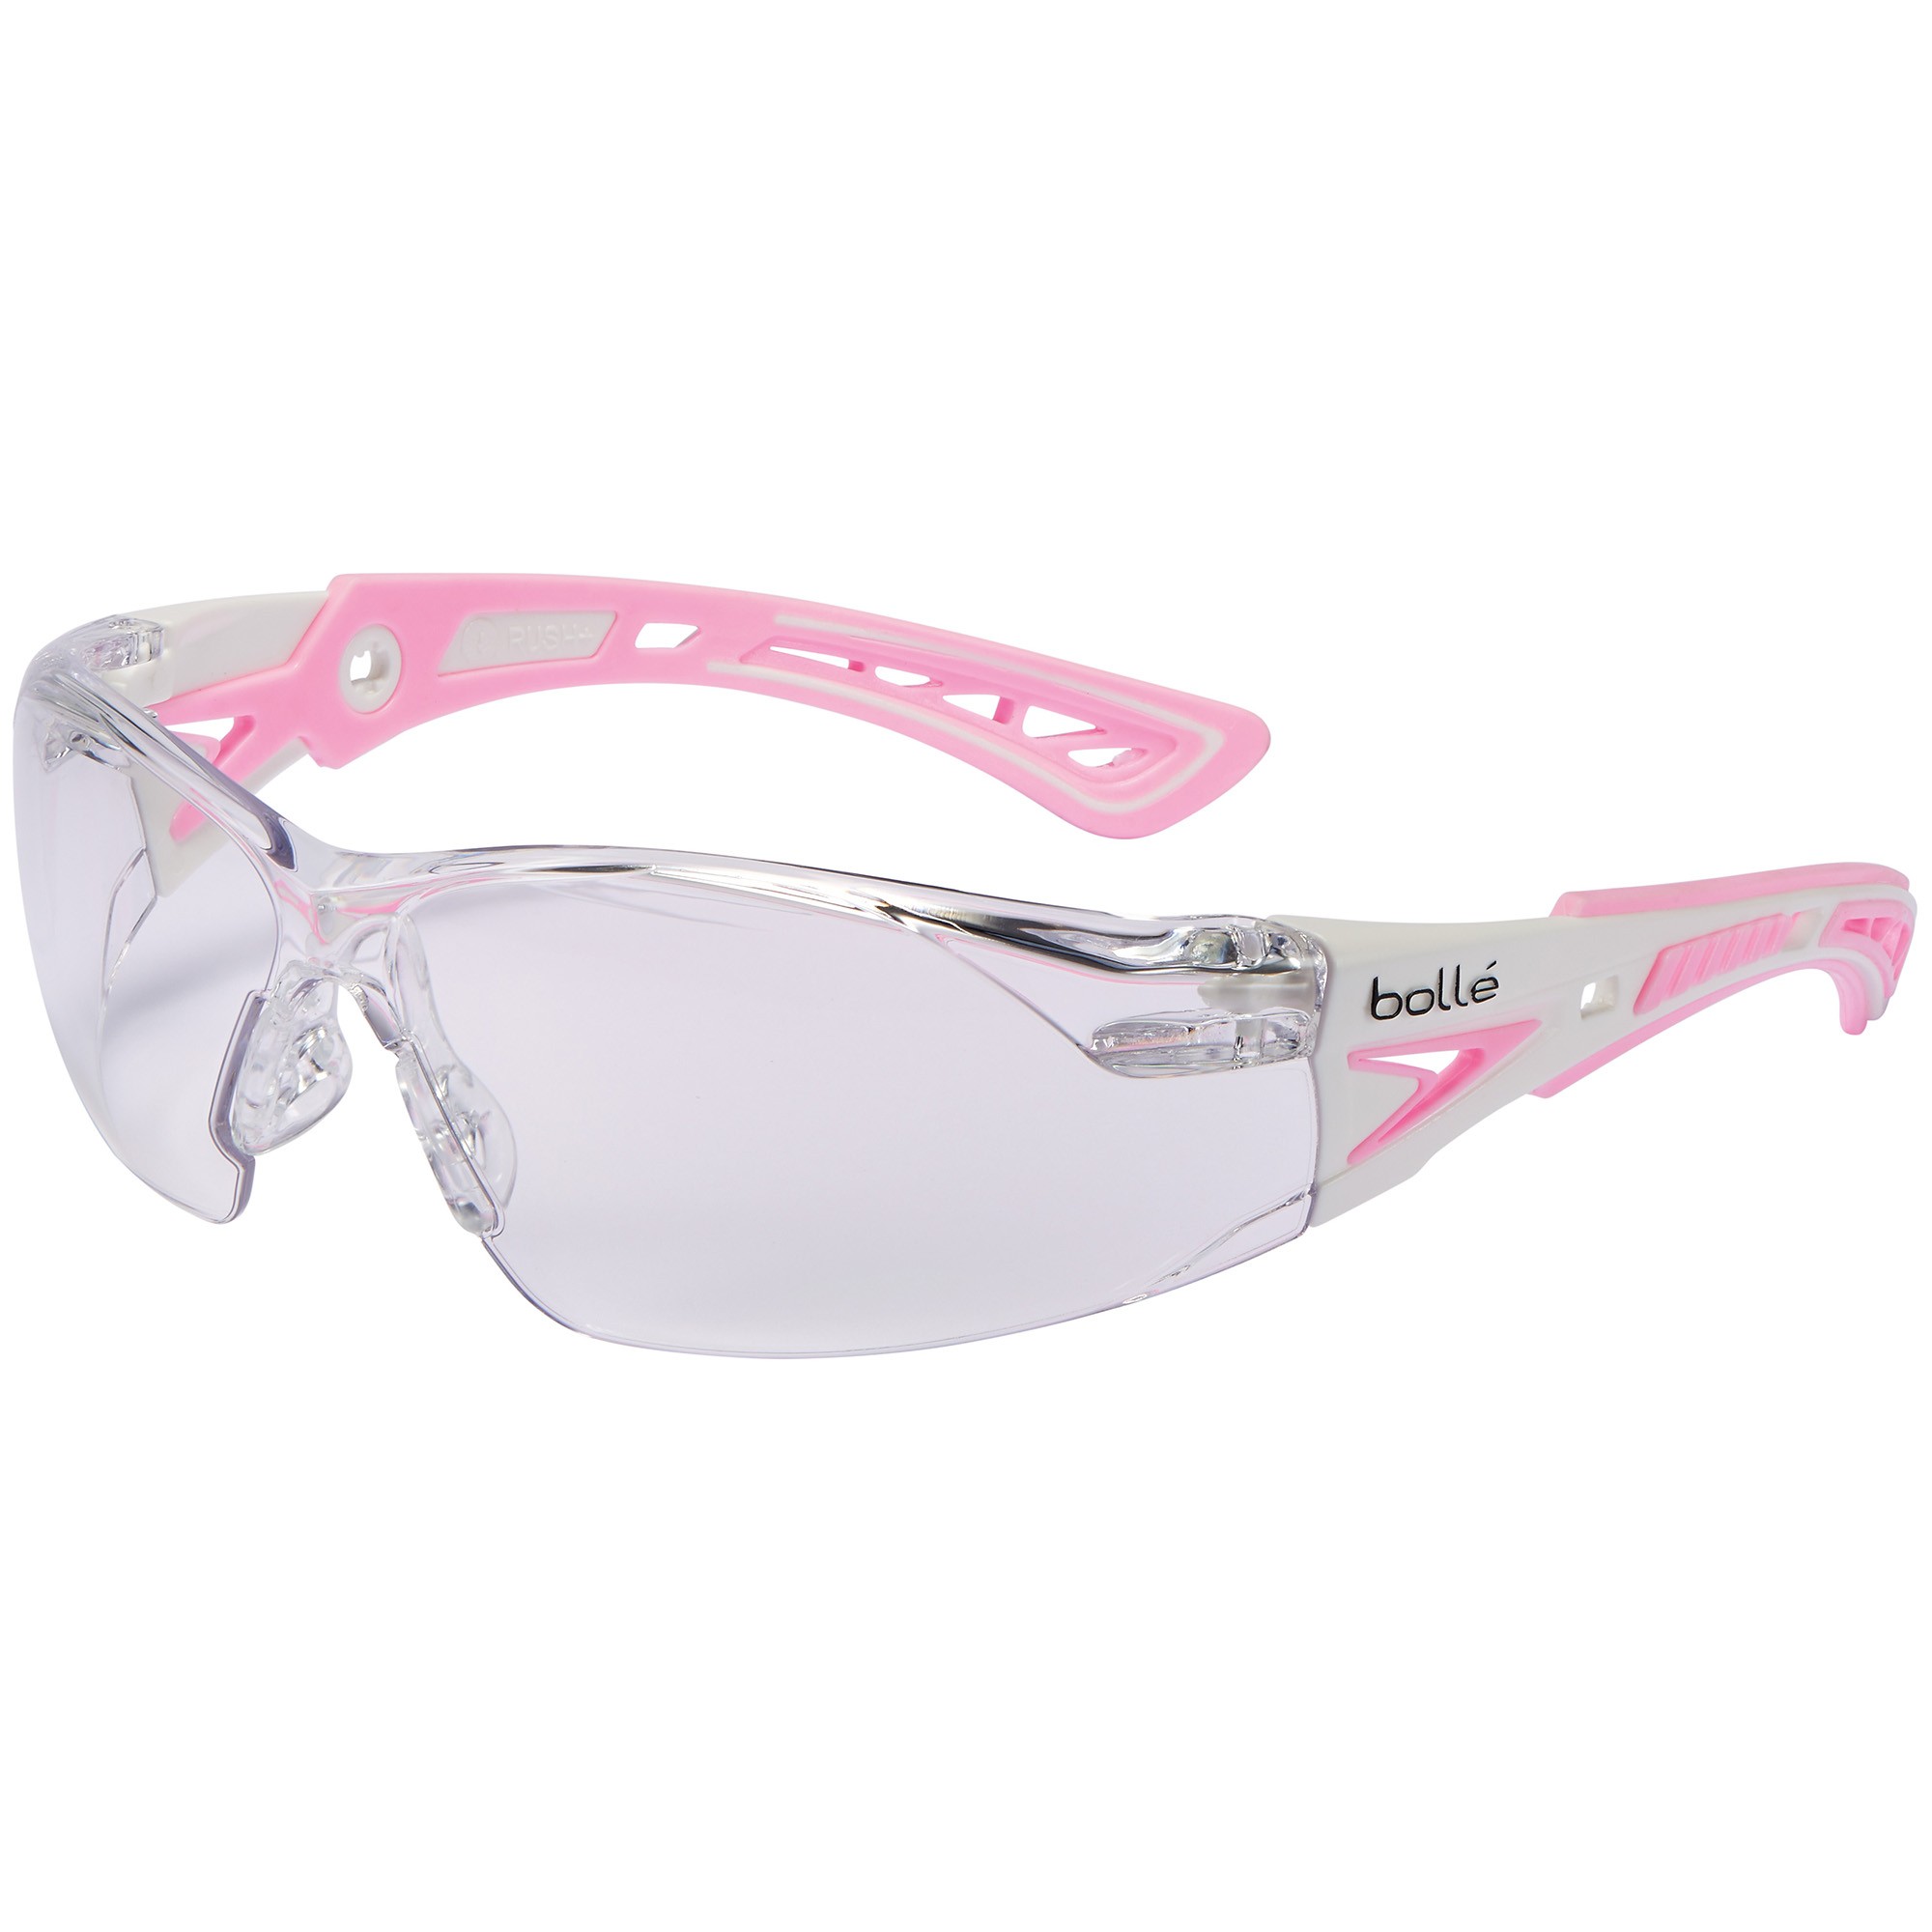 Bolle 40254 Rush Small Safety Glasses - Pink/White Temples - Clear Anti ...